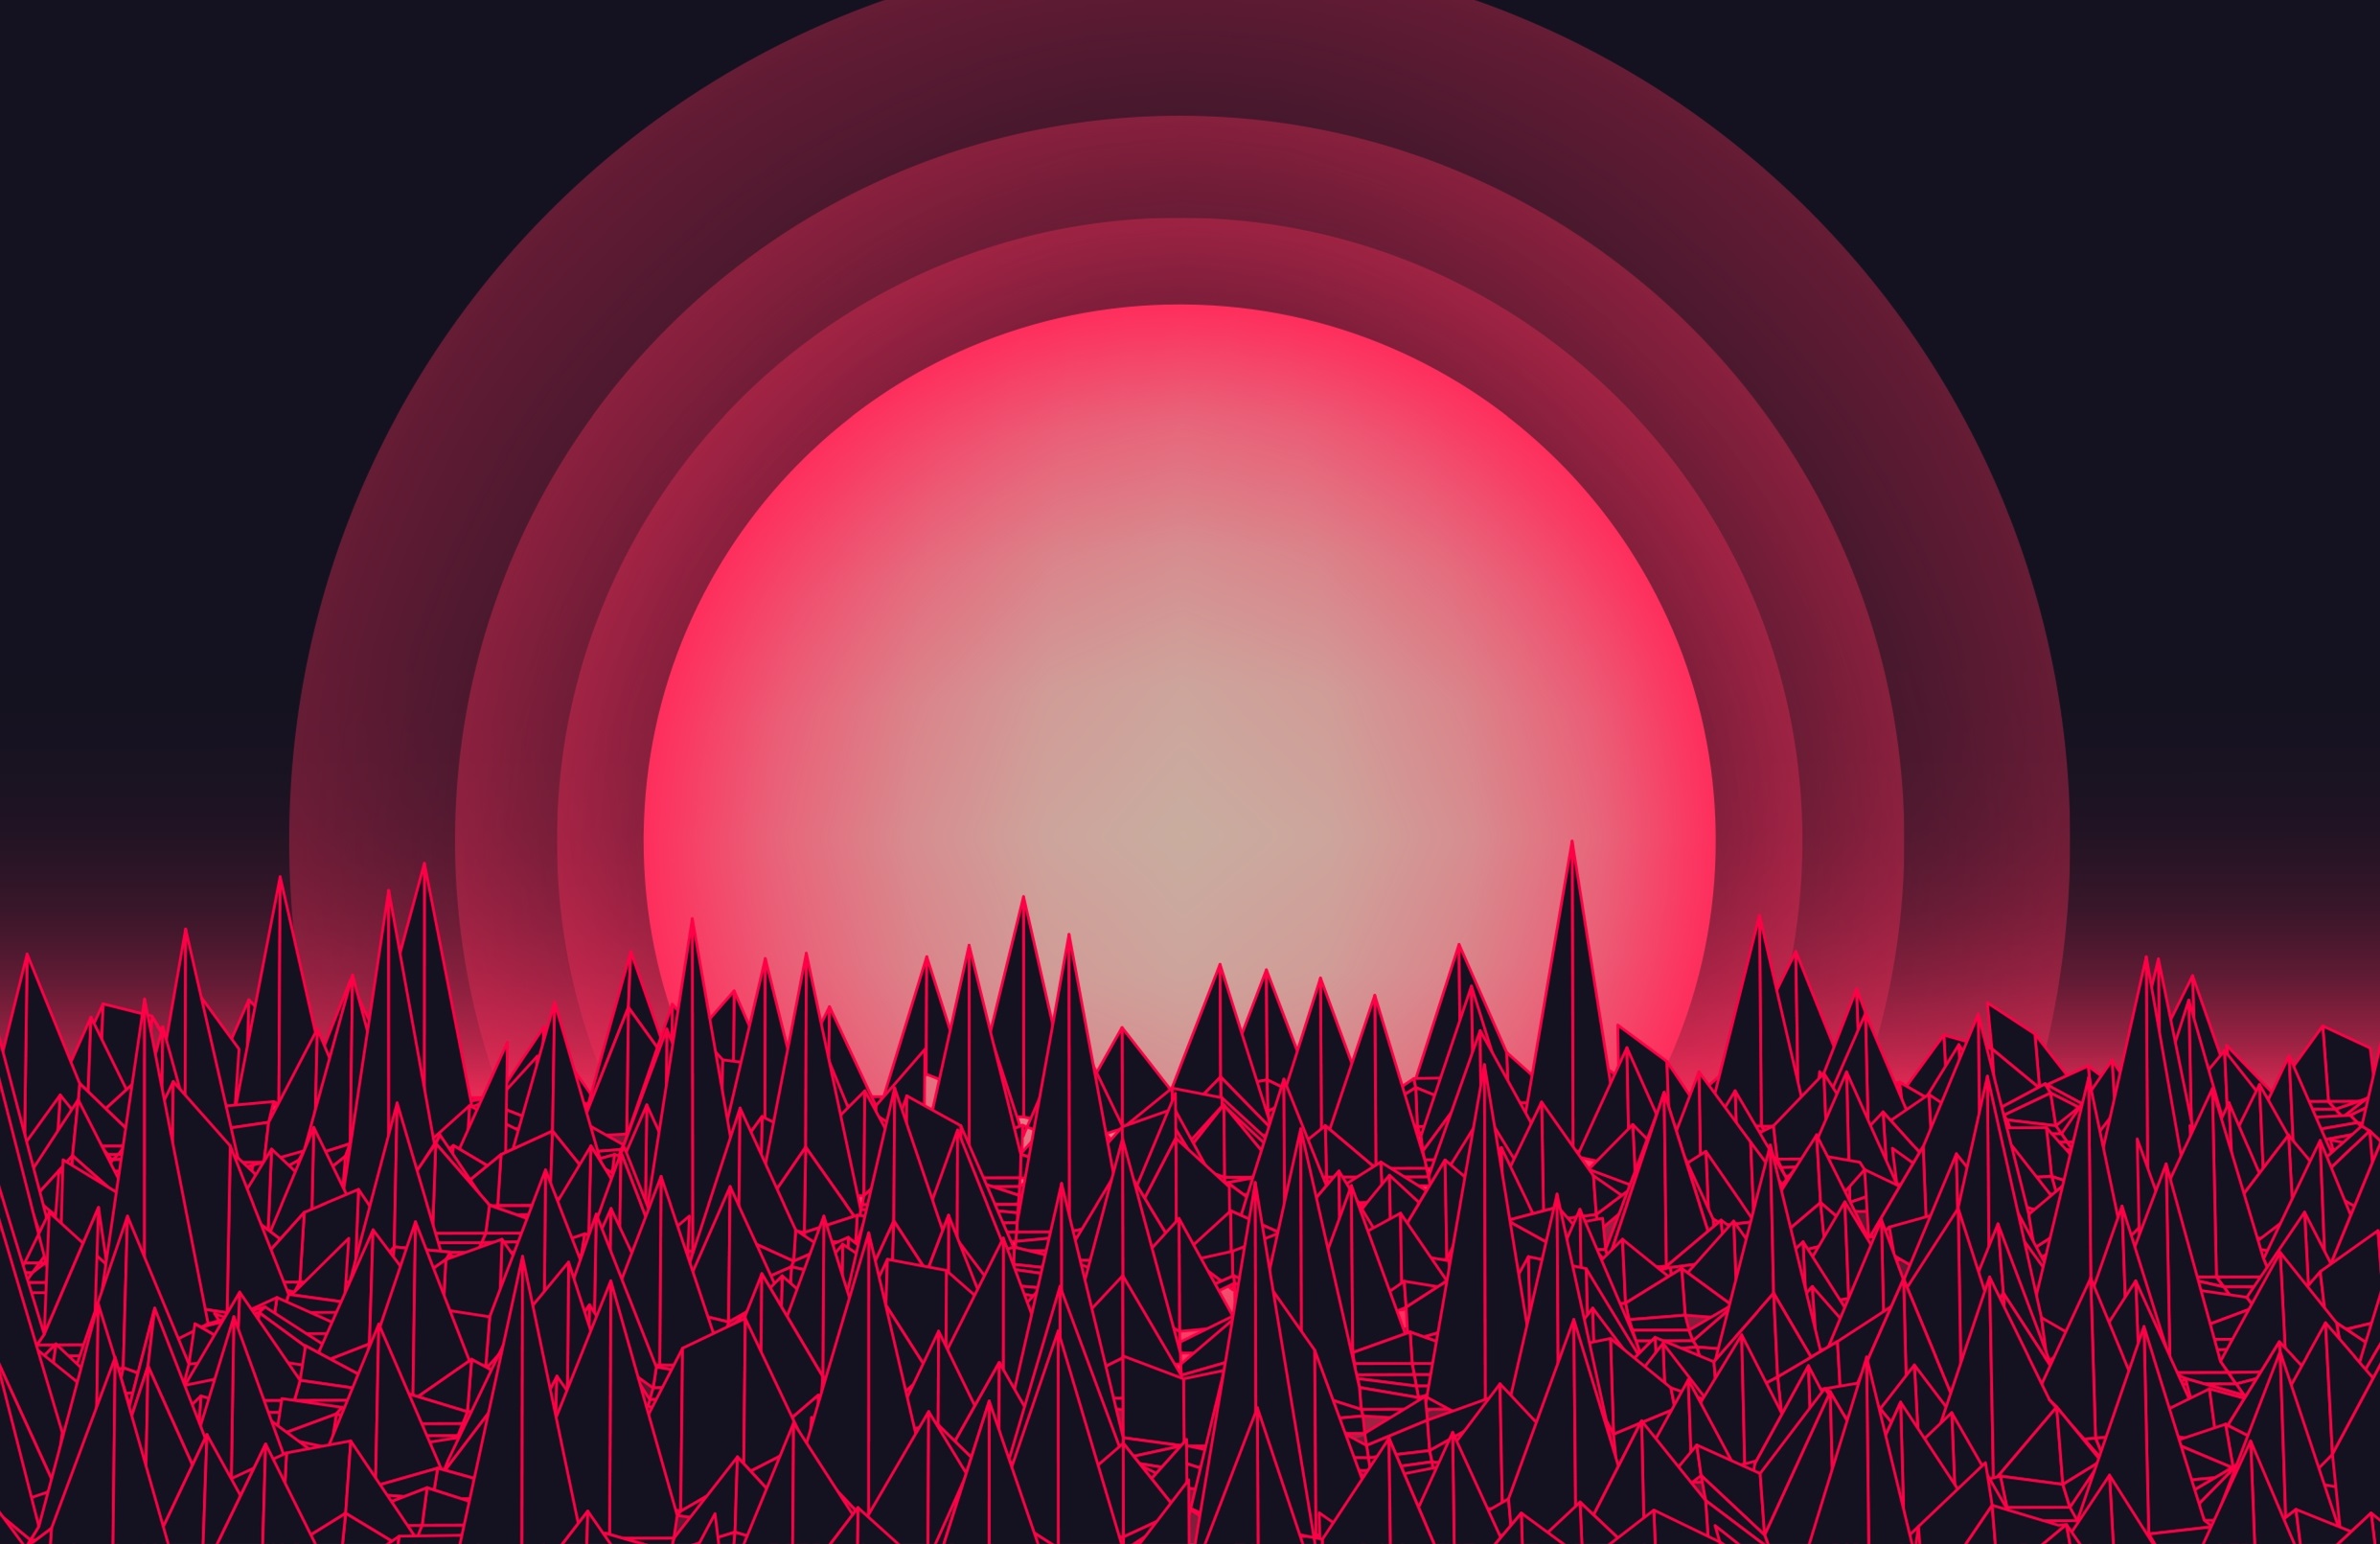 General 2484x1611 retro style synthwave artwork digital art Synth red abstract